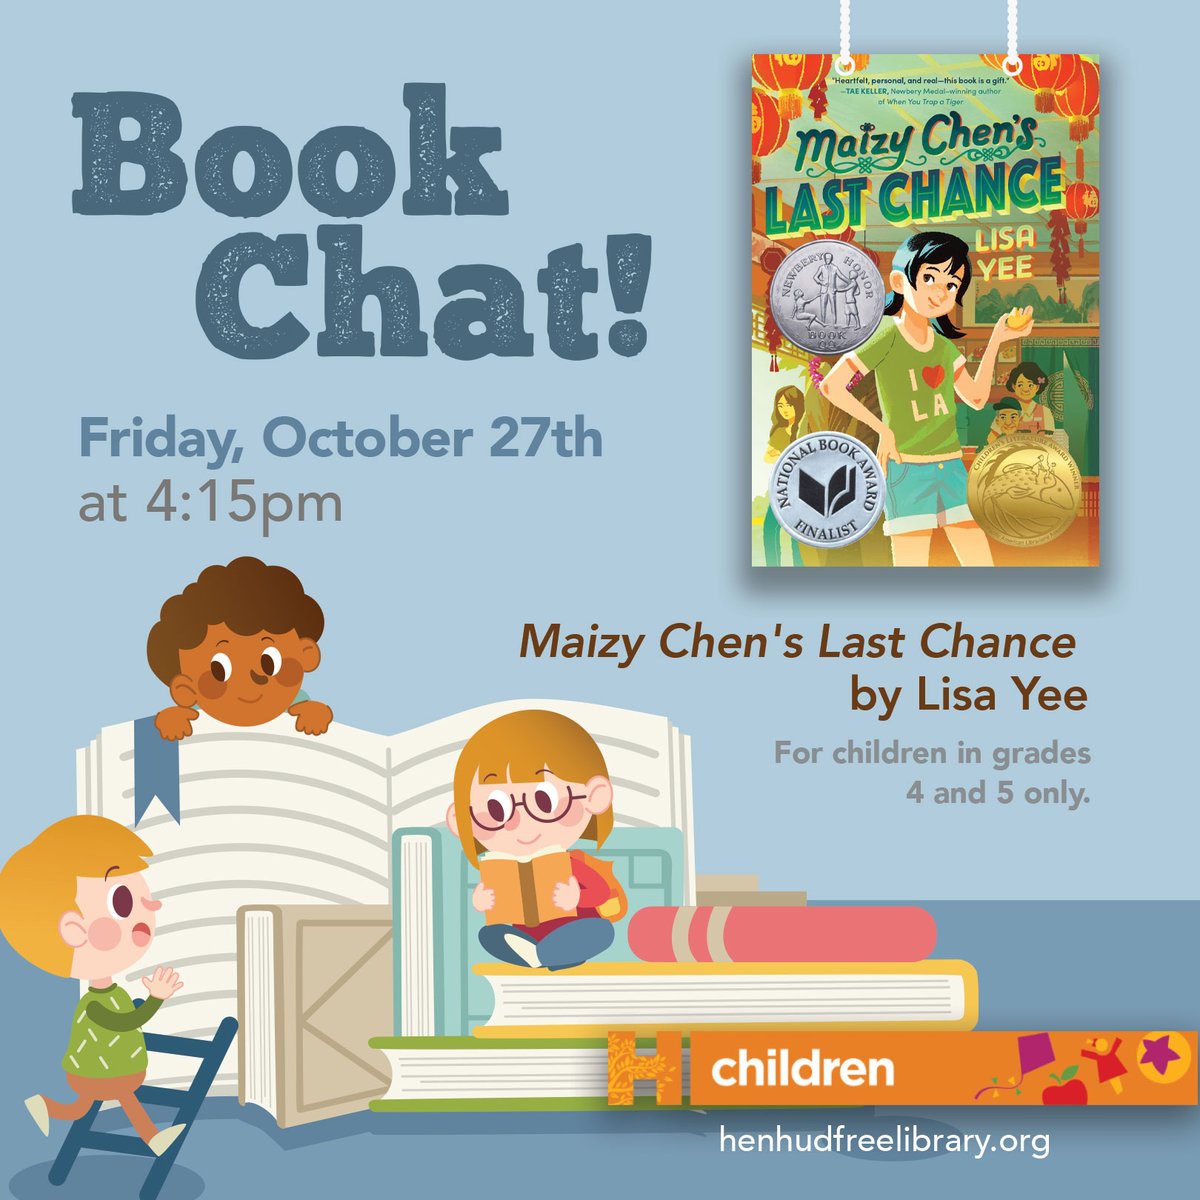 Once registered, visit the children’s room to pick-up your FREE copy of the book or email amacci@wlsmail.org to schedule a curbside pick-up.

Visit our website to register.

#bookchat #maizychenslastchance #lisayee #reading #hhﬂ  #librariesrock